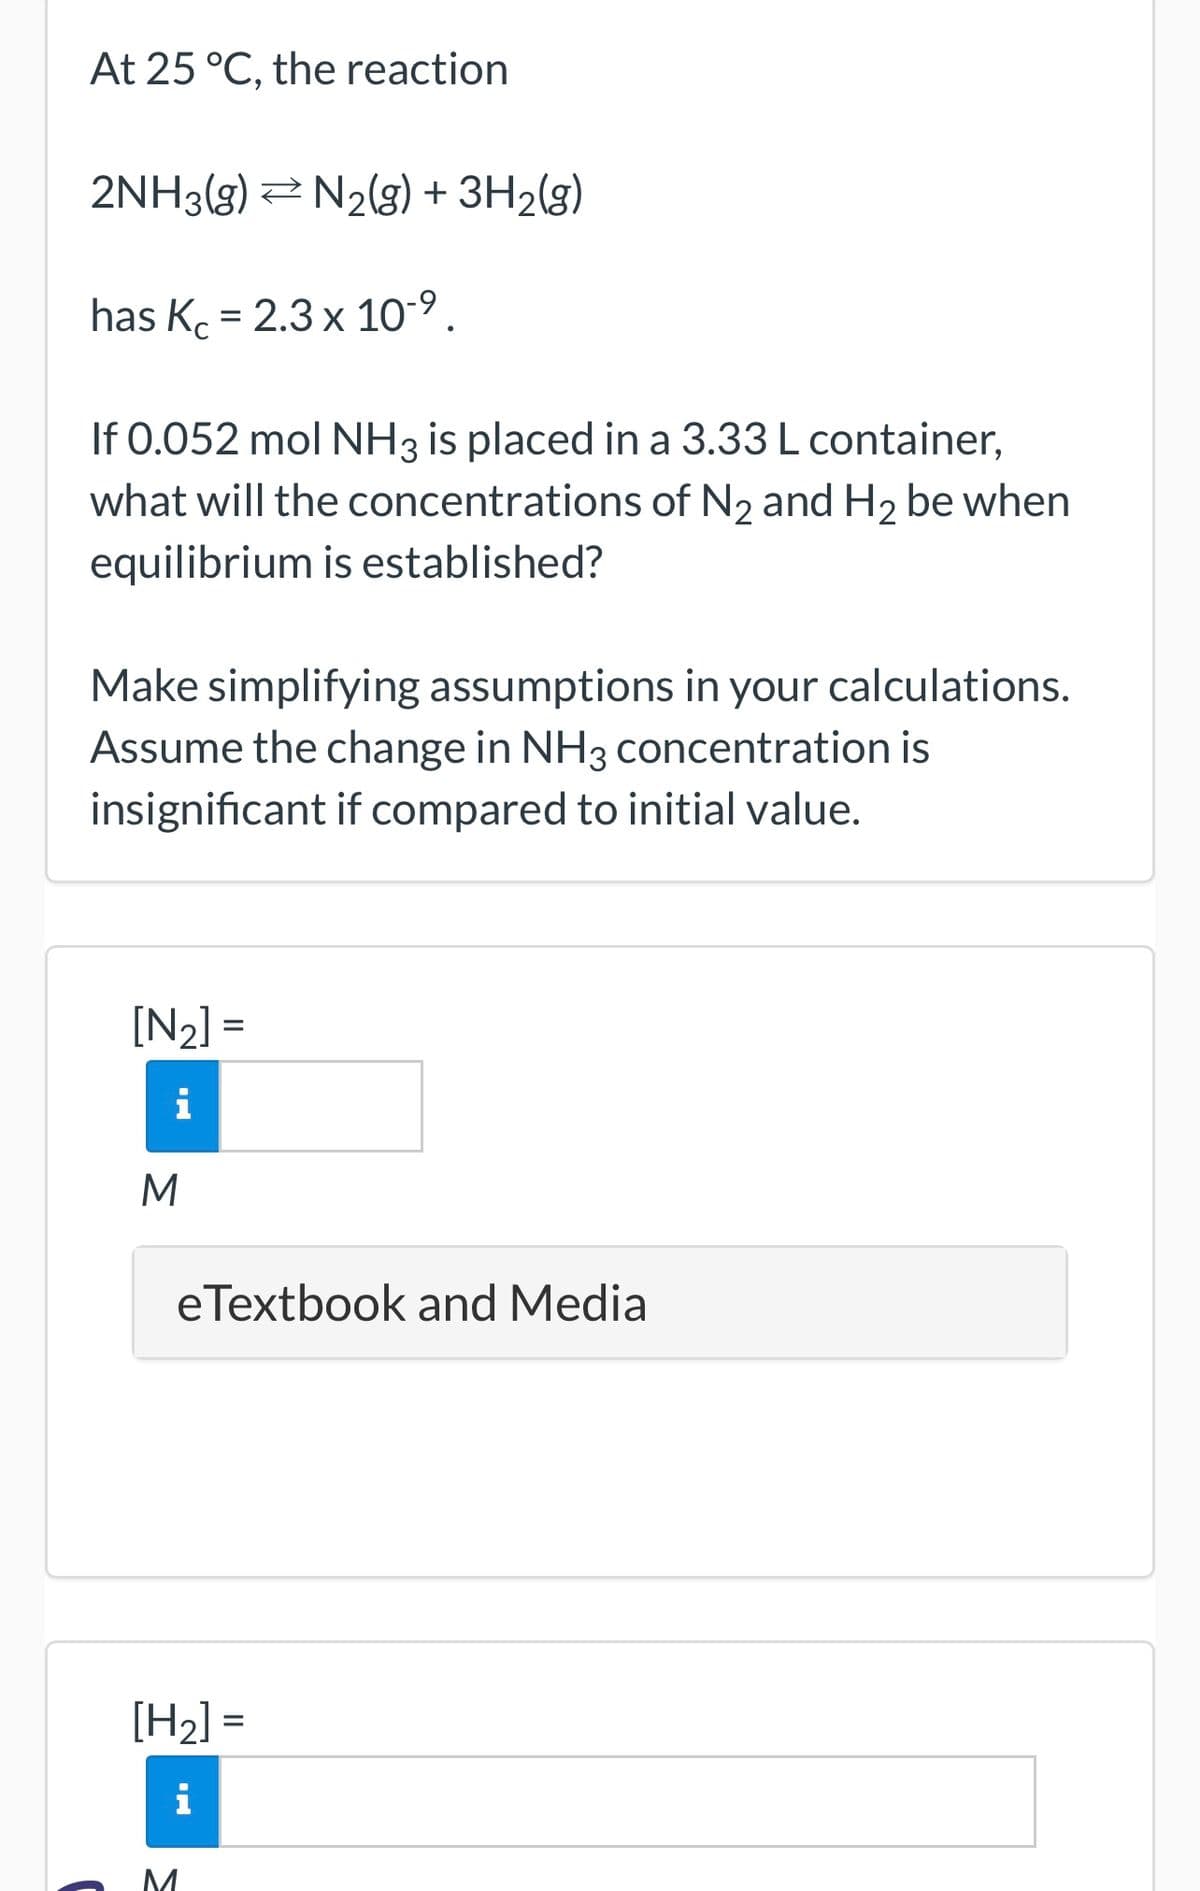 At 25 °C, the reaction
2NH3(g) N₂(g) + 3H₂(g)
has K = 2.3 x 10-⁹.
If 0.052 mol NH3 is placed in a 3.33 L container,
what will the concentrations of N₂ and H₂ be when
equilibrium is established?
Make simplifying assumptions in your calculations.
Assume the change in NH3 concentration is
insignificant if compared to initial value.
[N₂] =
i
M
eTextbook and Media
[H₂] =
i